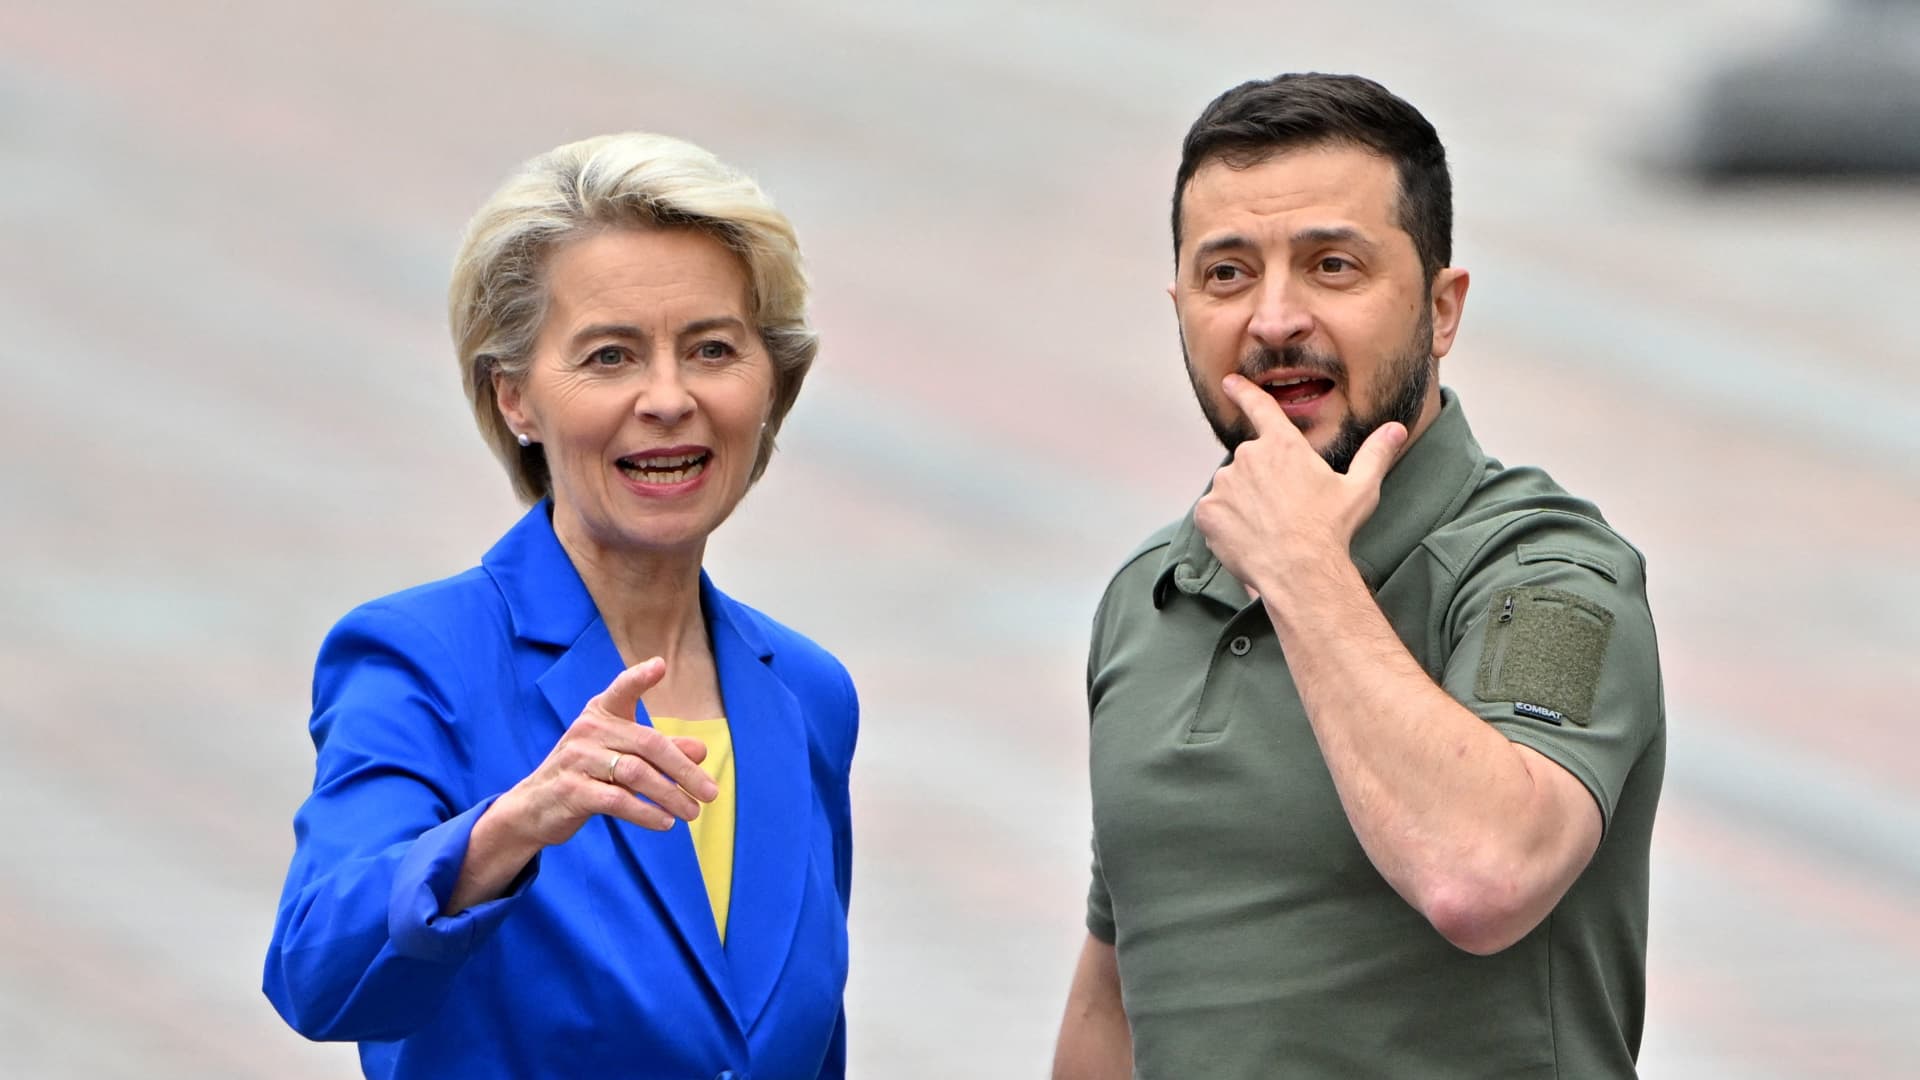 Ukraine will host European Commission President Ursula von der Leyen and other top EU officials on Friday, with hopes high in Kyiv that its application to join the EU will continue to progress.